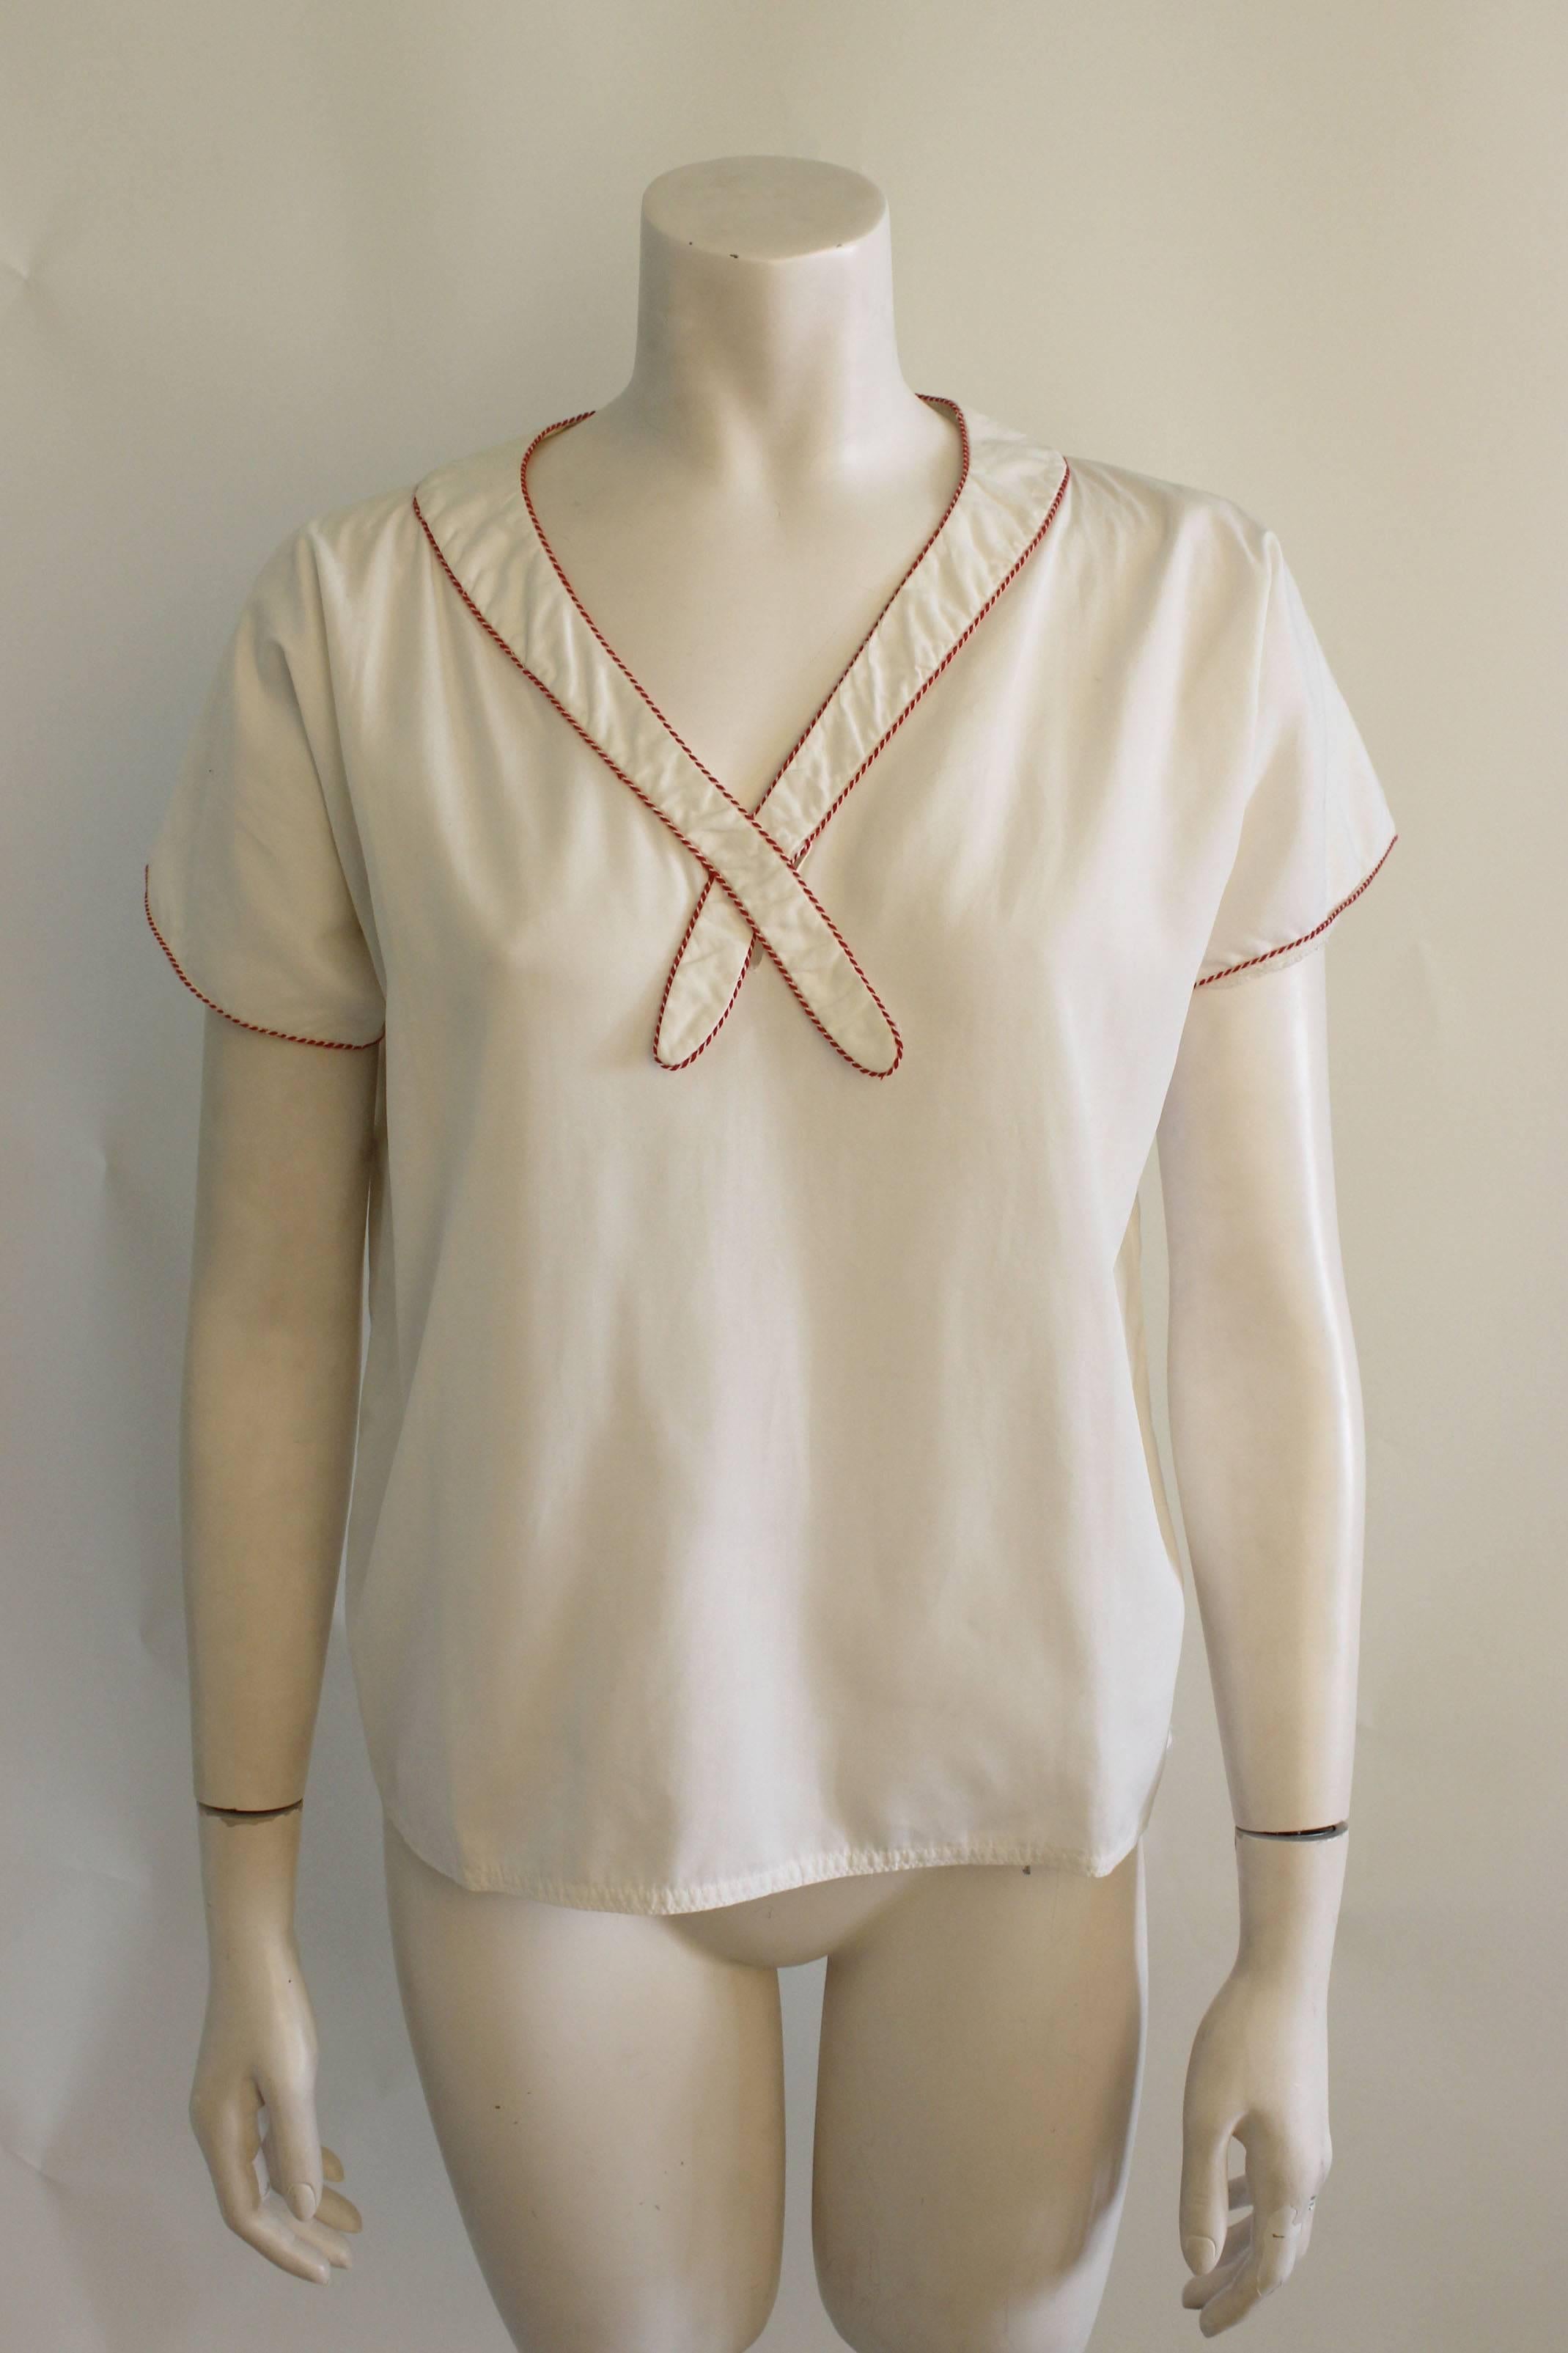  This sweet blouse by Geoffry Beene is a simple box shape in white with red and white piping.The label reads Beene Bag 